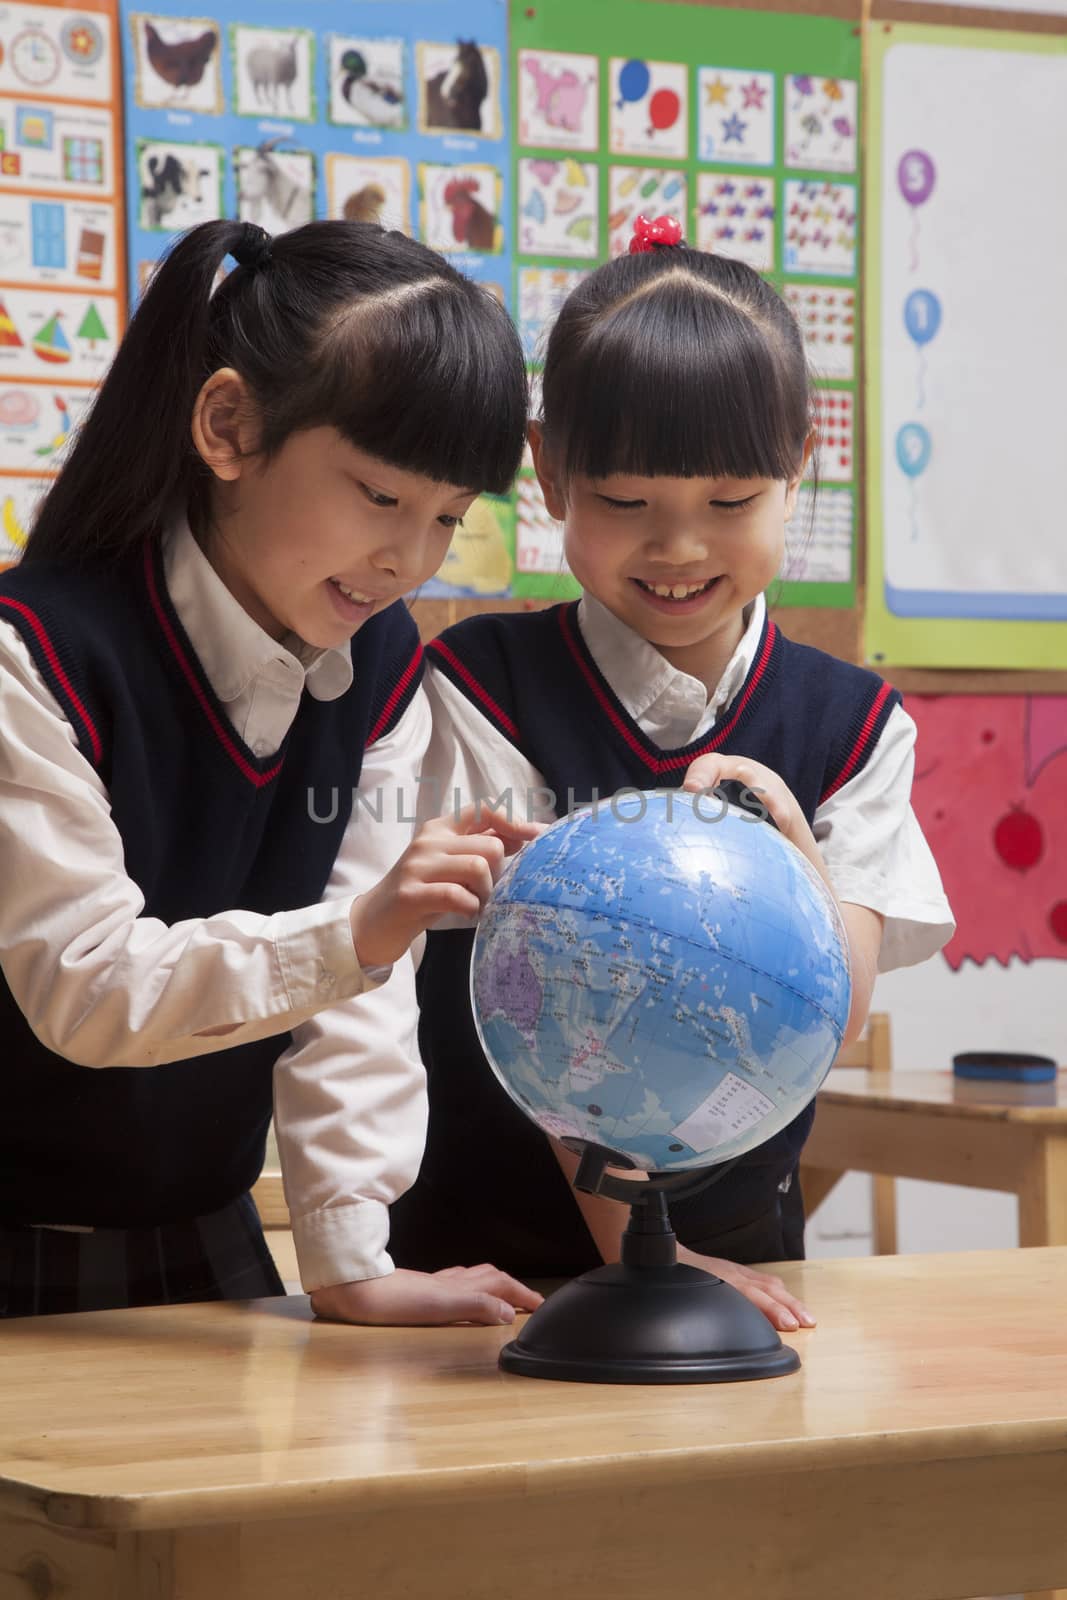 Schoolgirls looking at a globe in the classroom